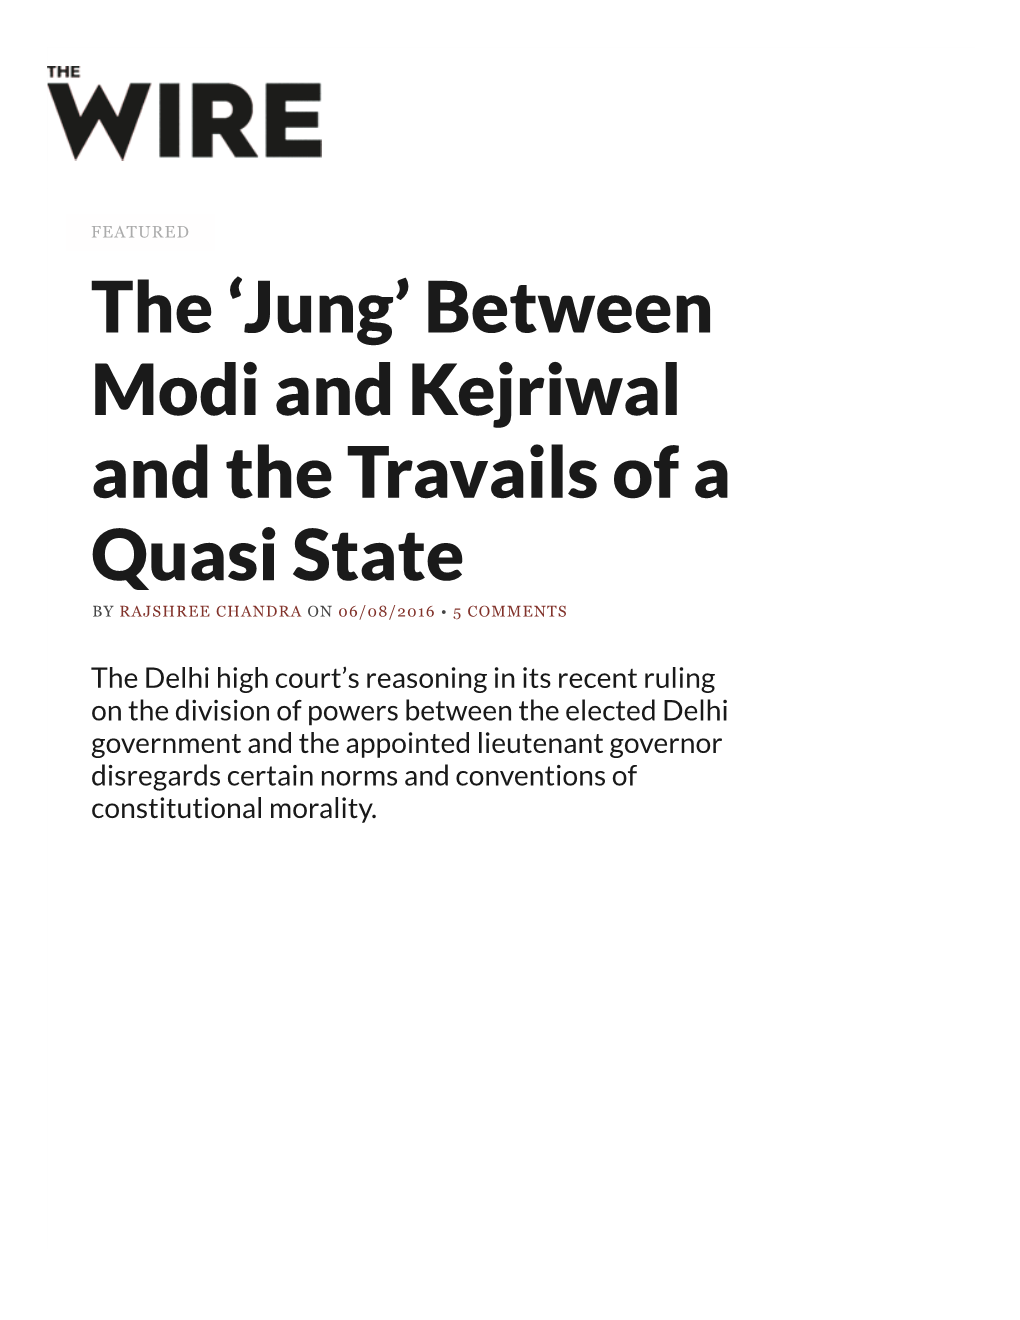 Jung’ Between Modi and Kejriwal and the Travails of a Quasi State by RAJSHREE CHANDRA on 06/08/2016 • 5 COMMENTS